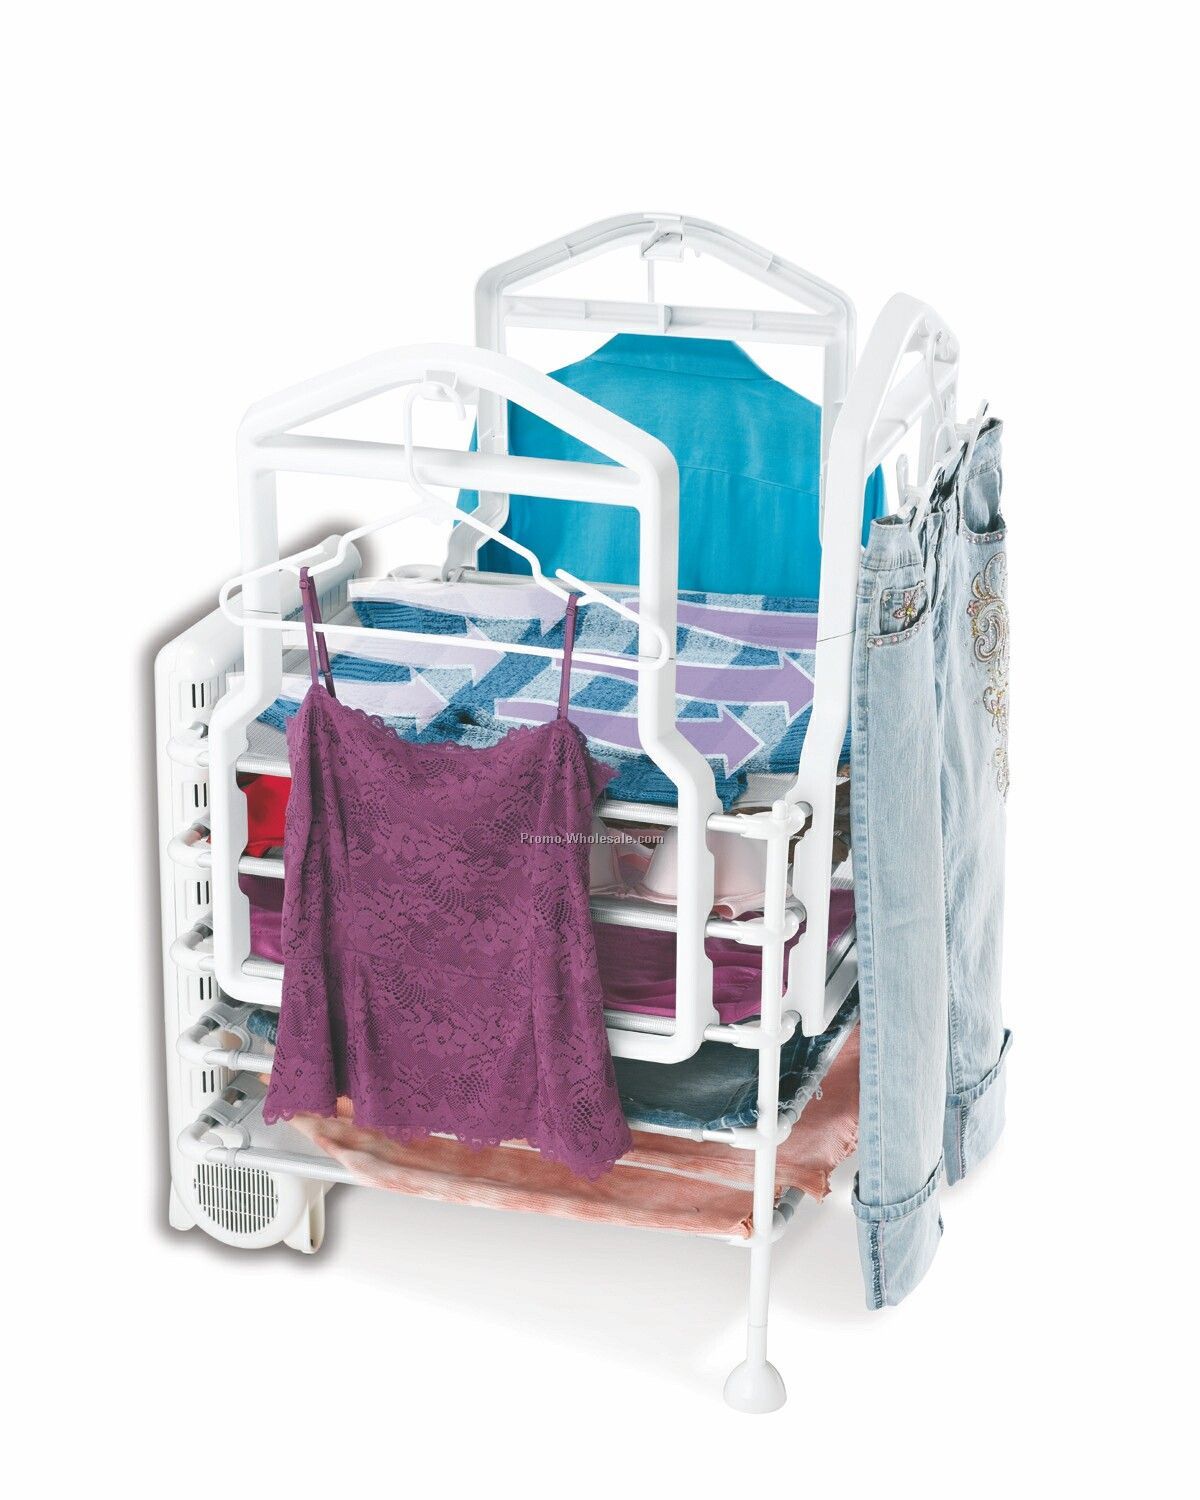 Hamilton Beach Quick Dry Deluxe 8 Way Garment Drying Station